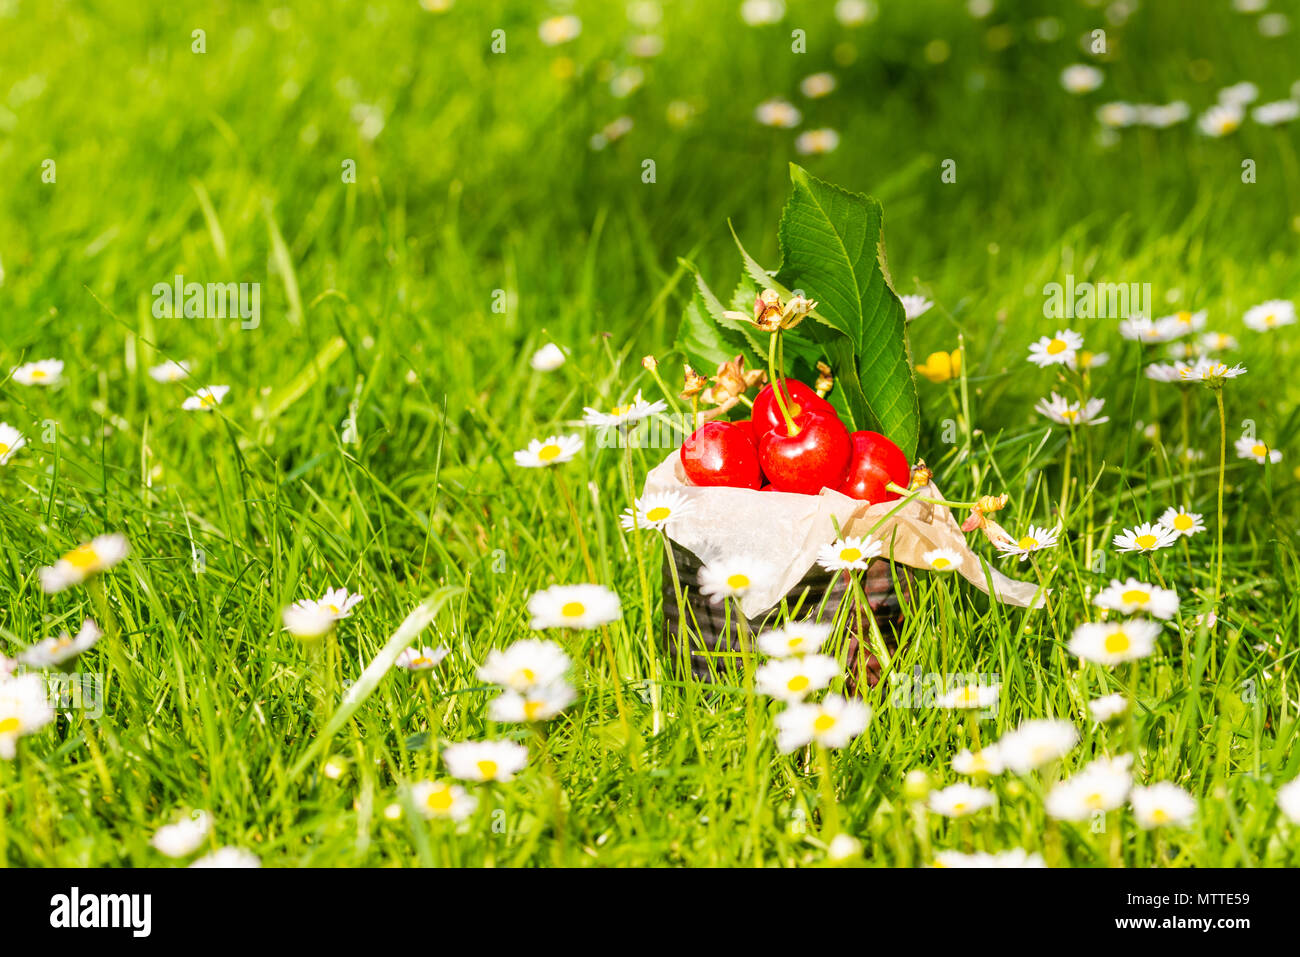 Horizontal photo with old vintage tin full of red fresh cherries. The can is placed in higher green grass with many white daisies around. Fruit is in  Stock Photo